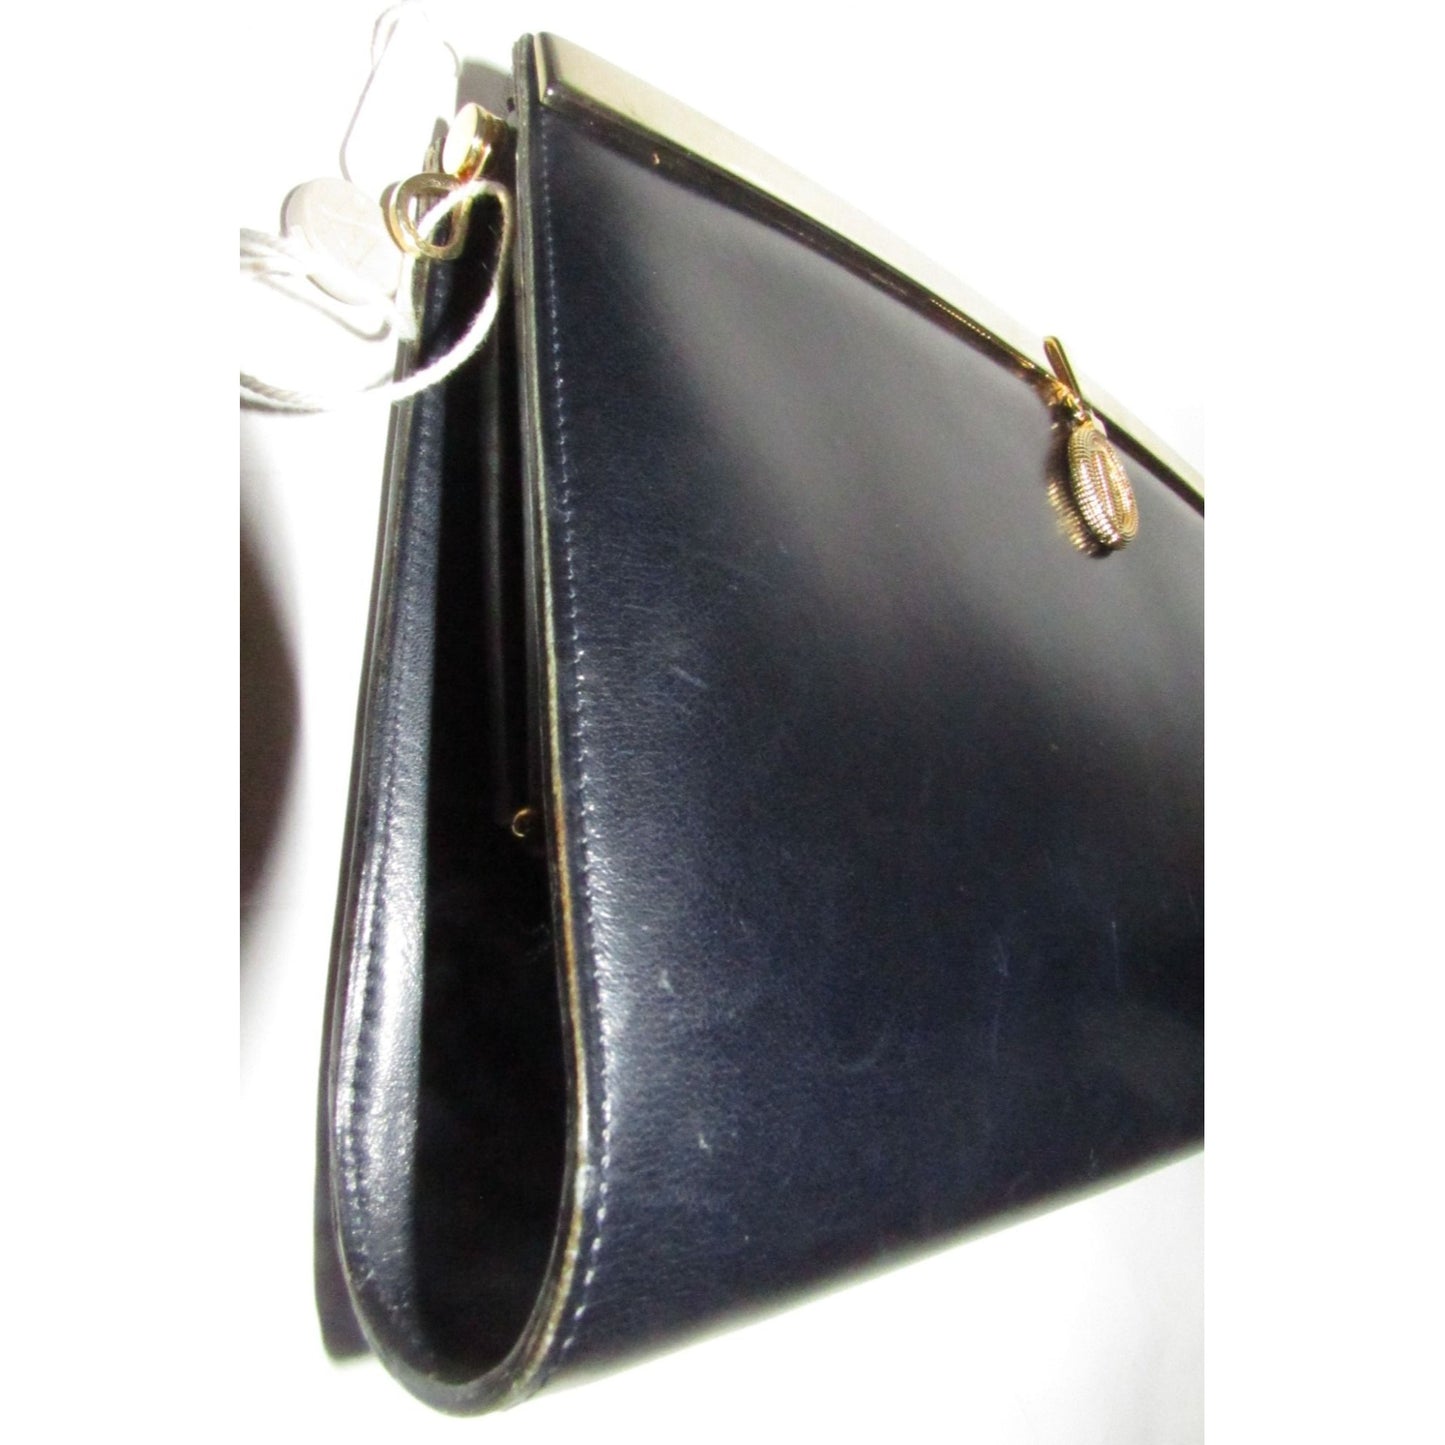 1960s mod, Dior, navy blue leather, two-way style with a hinged top with a latch snap closure, bold, gold Dior accents, & a removable strap